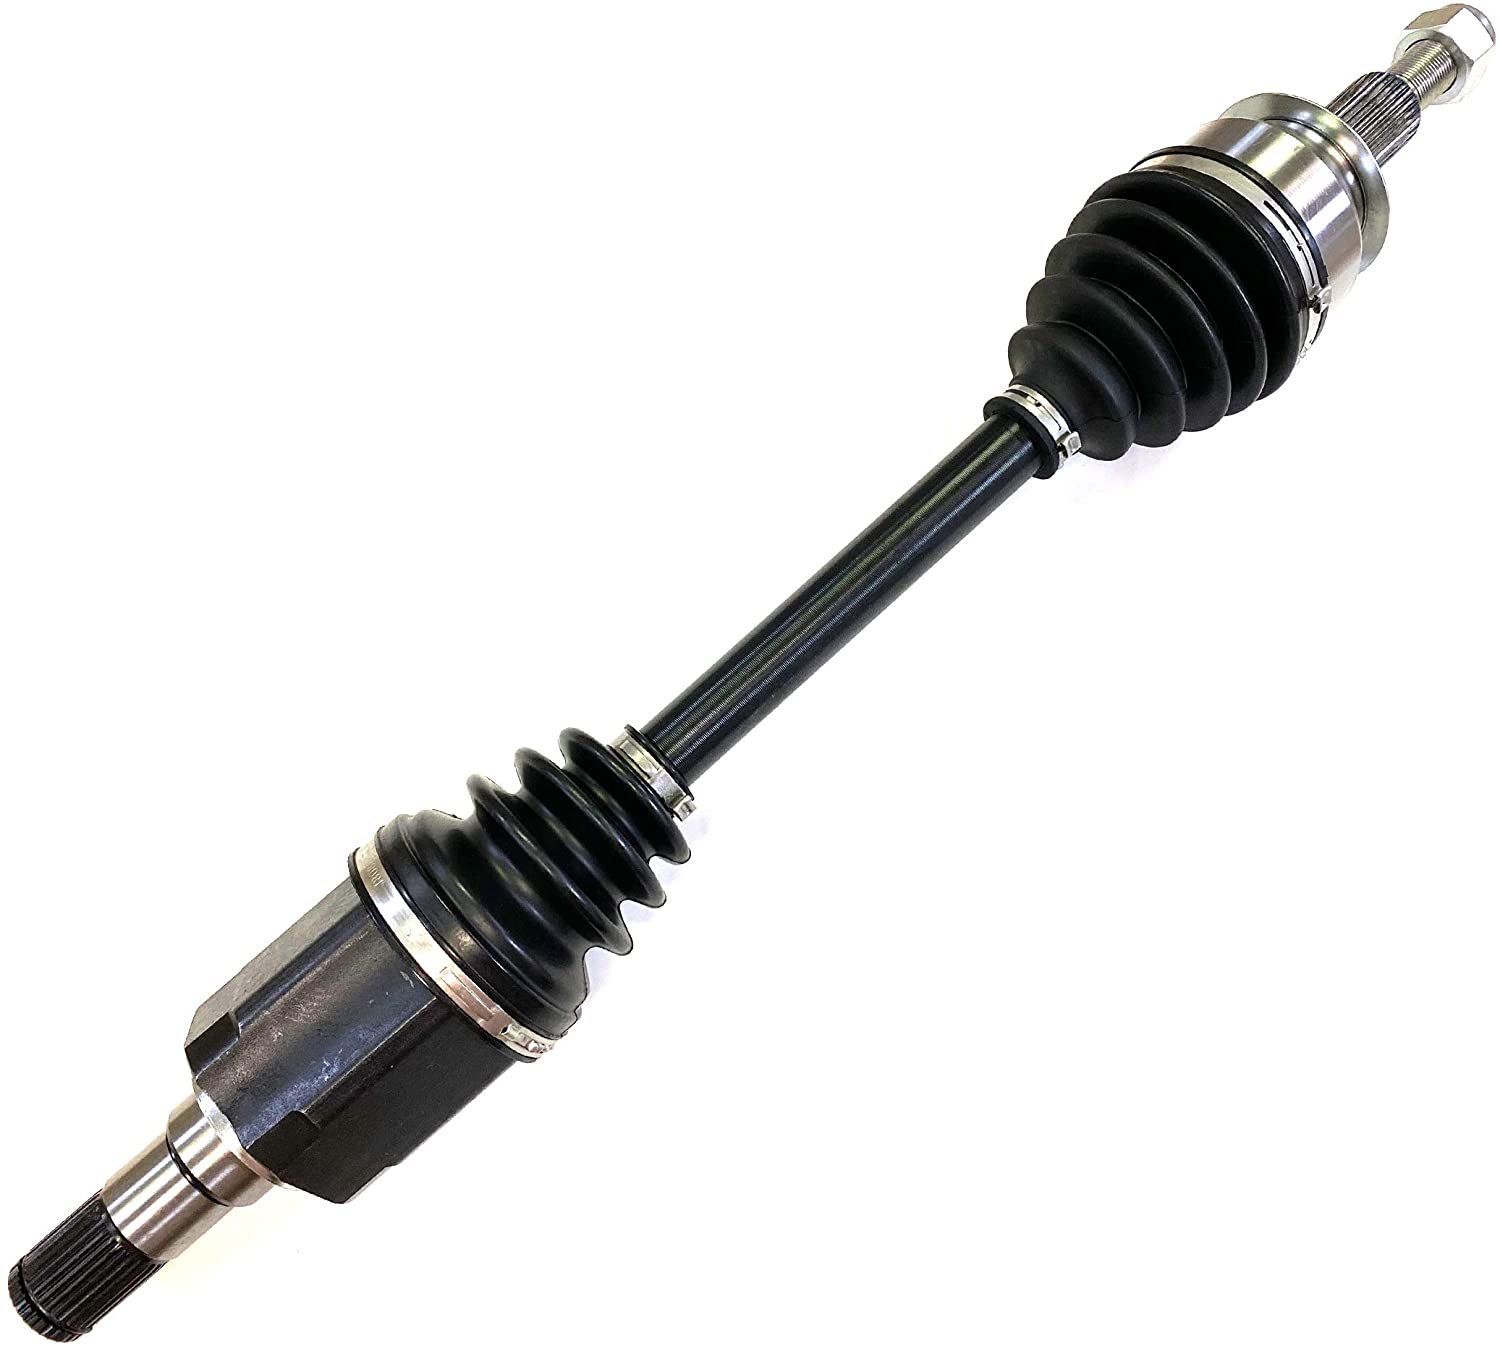 DTA 1 New Front Left Side CV Axle Compatible With 2014-2017 Mazda 6 With Automatic Trans Only; 2014-2017 CX5, 2.5L FWD and Automatic Only